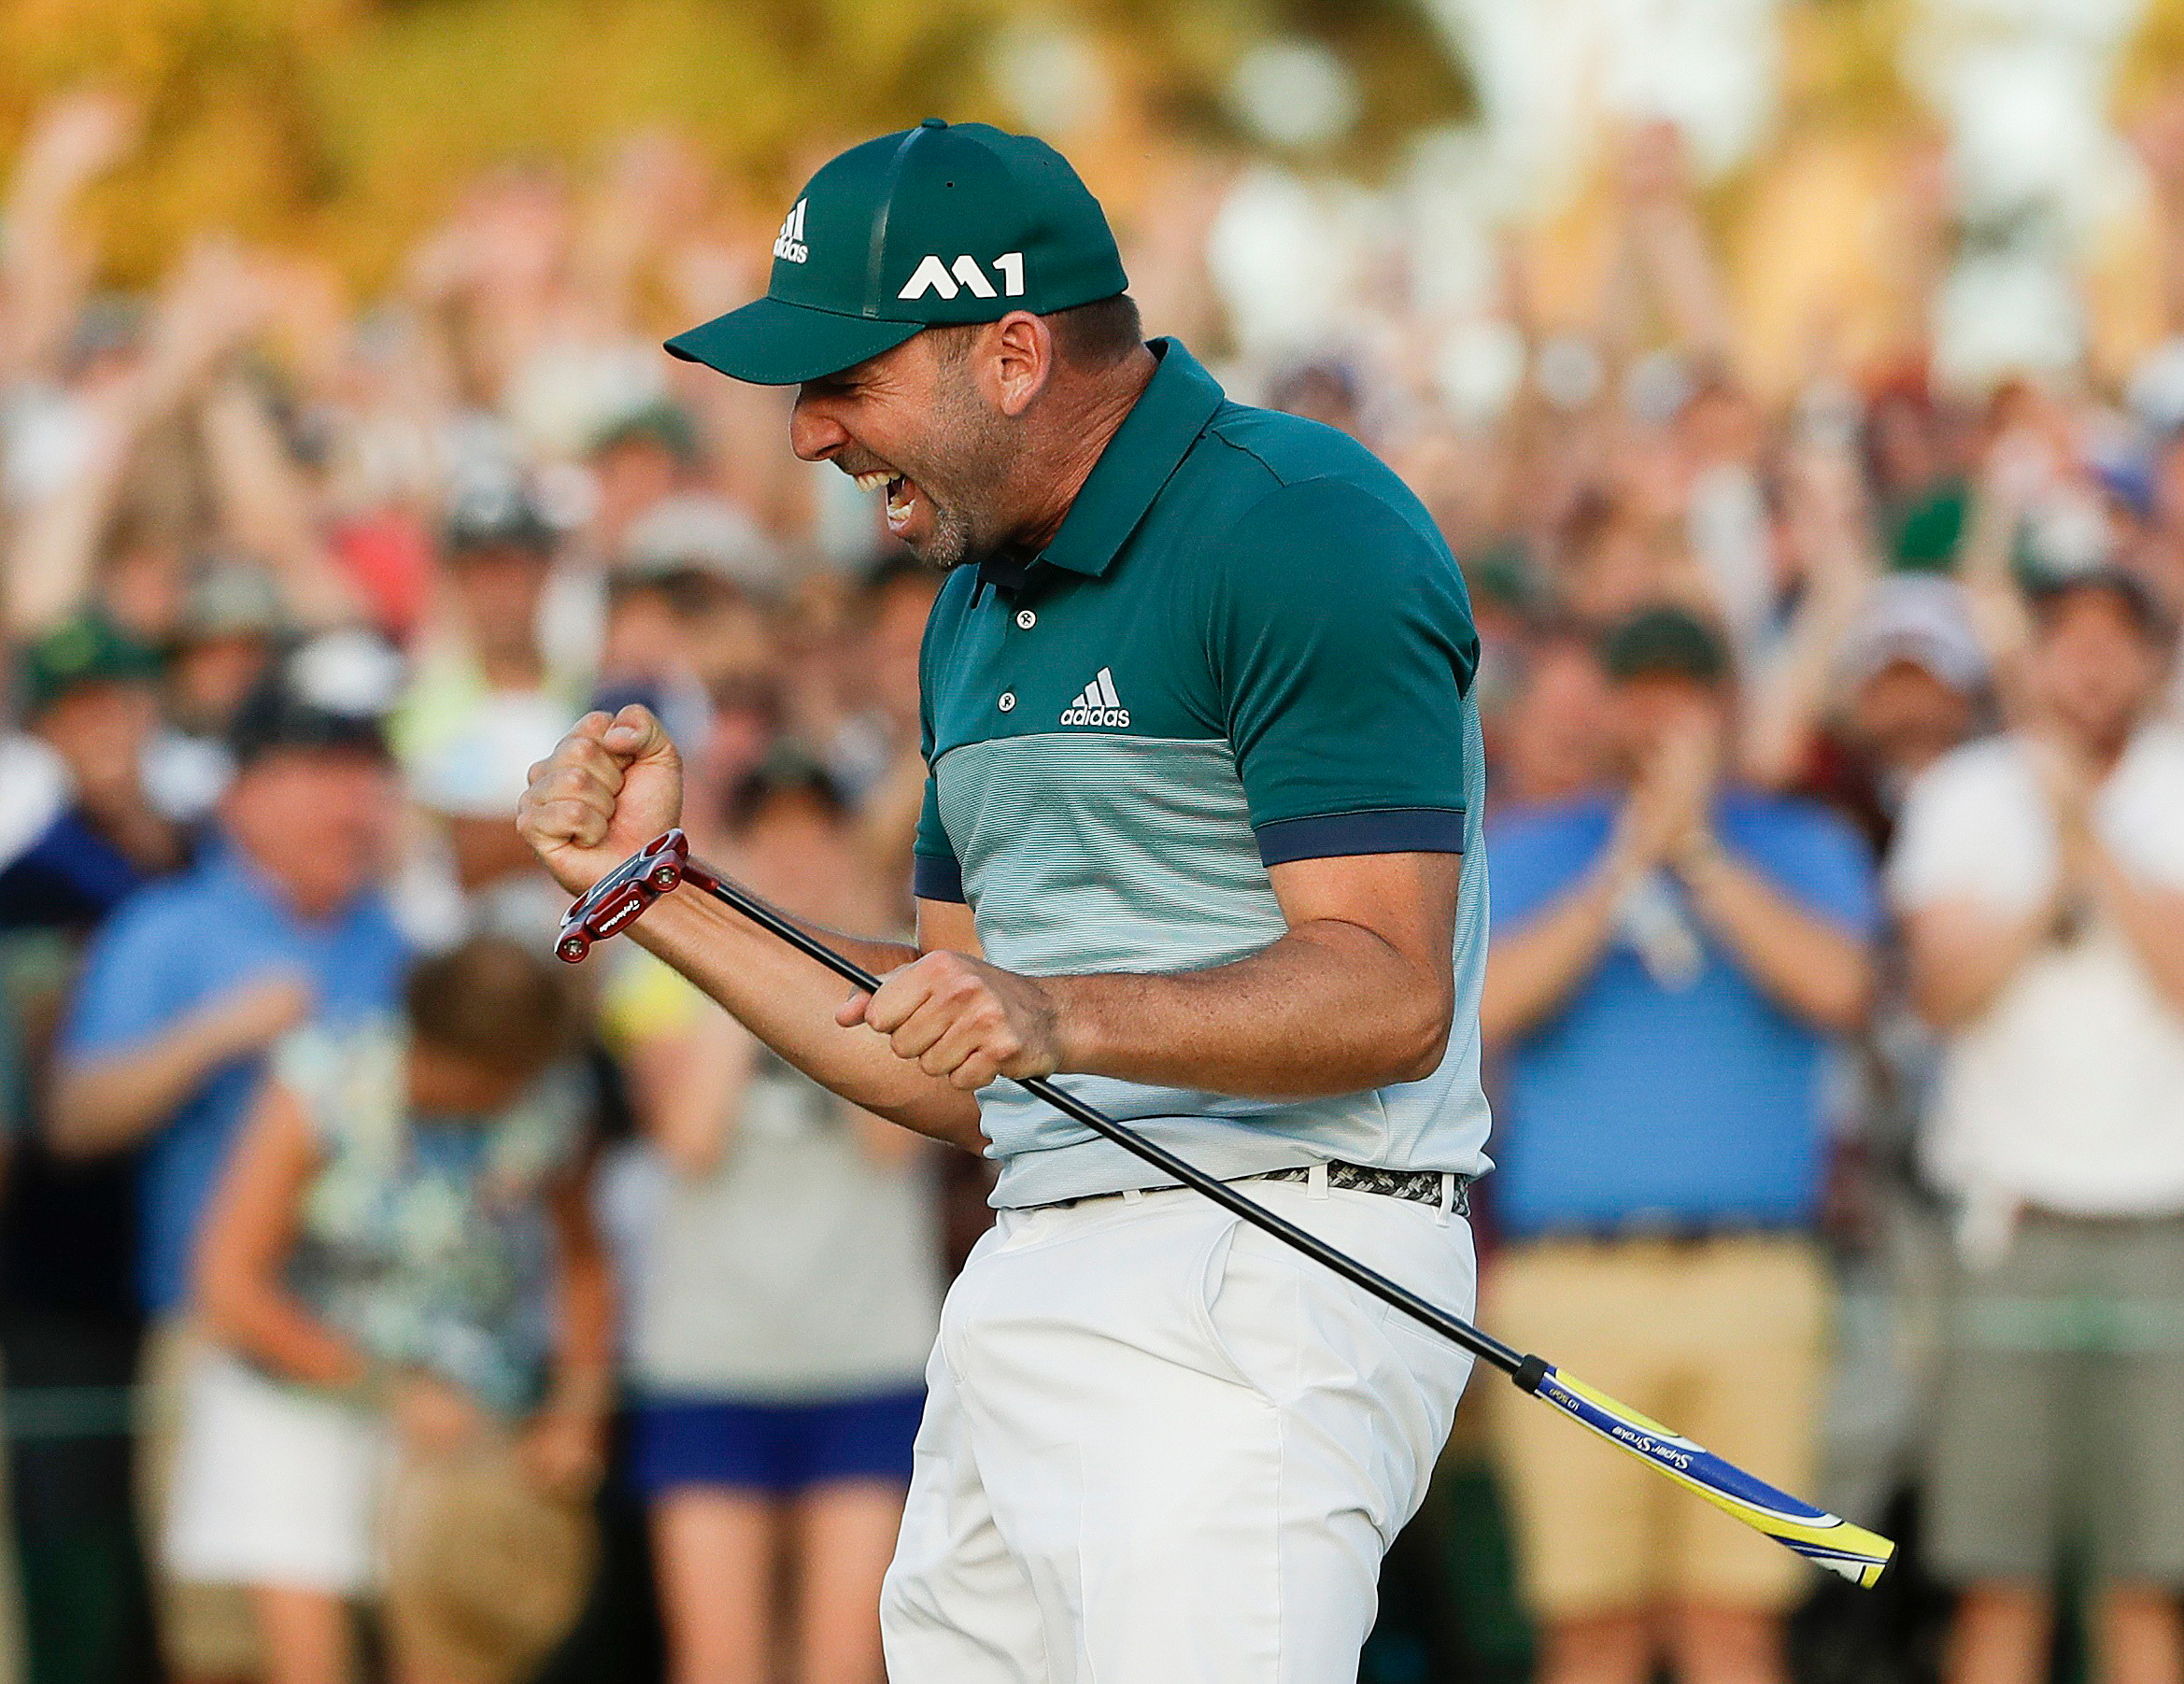 Sergio Garcia, of Spain, reacts after making his birdie putt on the 18th green to win the Masters golf tournament after a playoff on April 9, 2017, in Augusta. (Matt Slocum—AP)